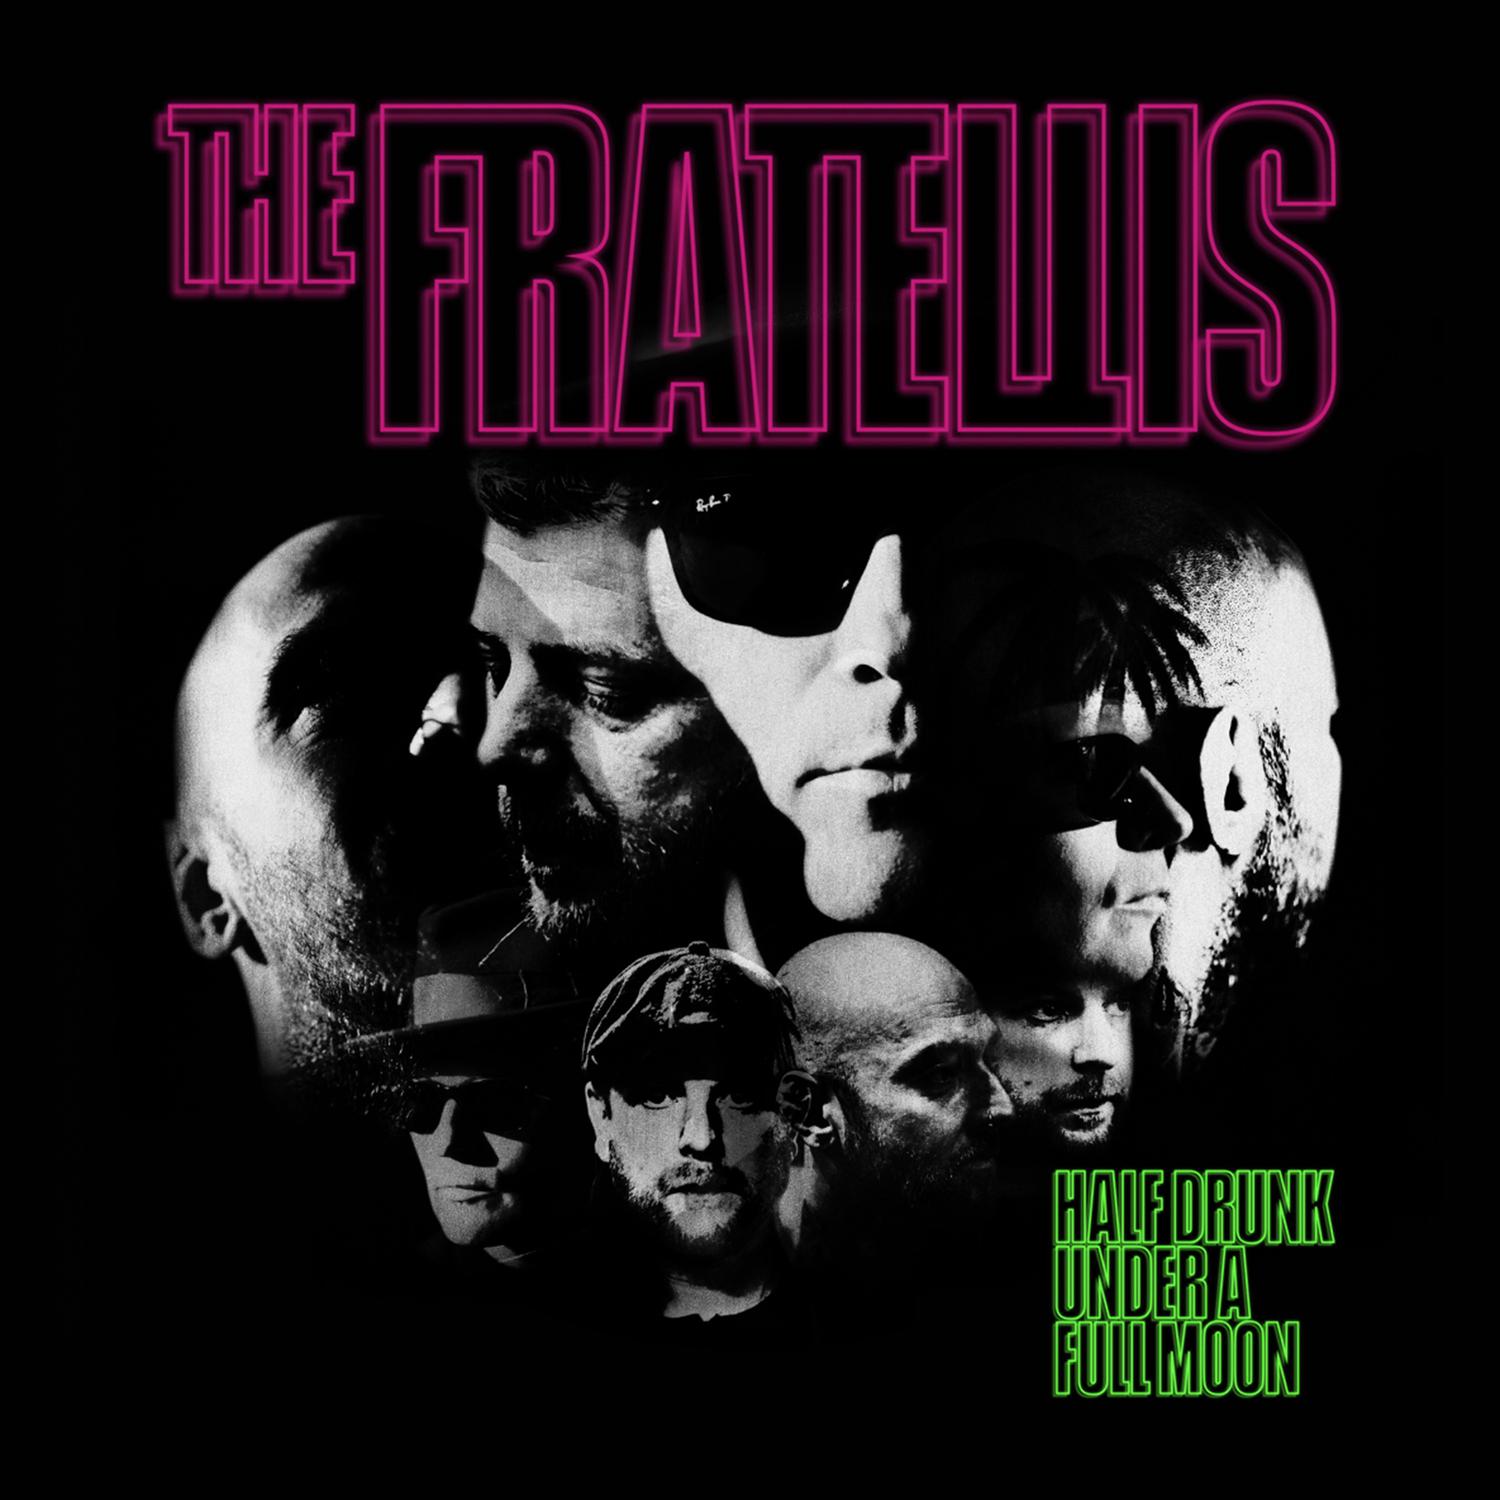 The Fratellis - Hello Stranger (Old Fashioned Version)